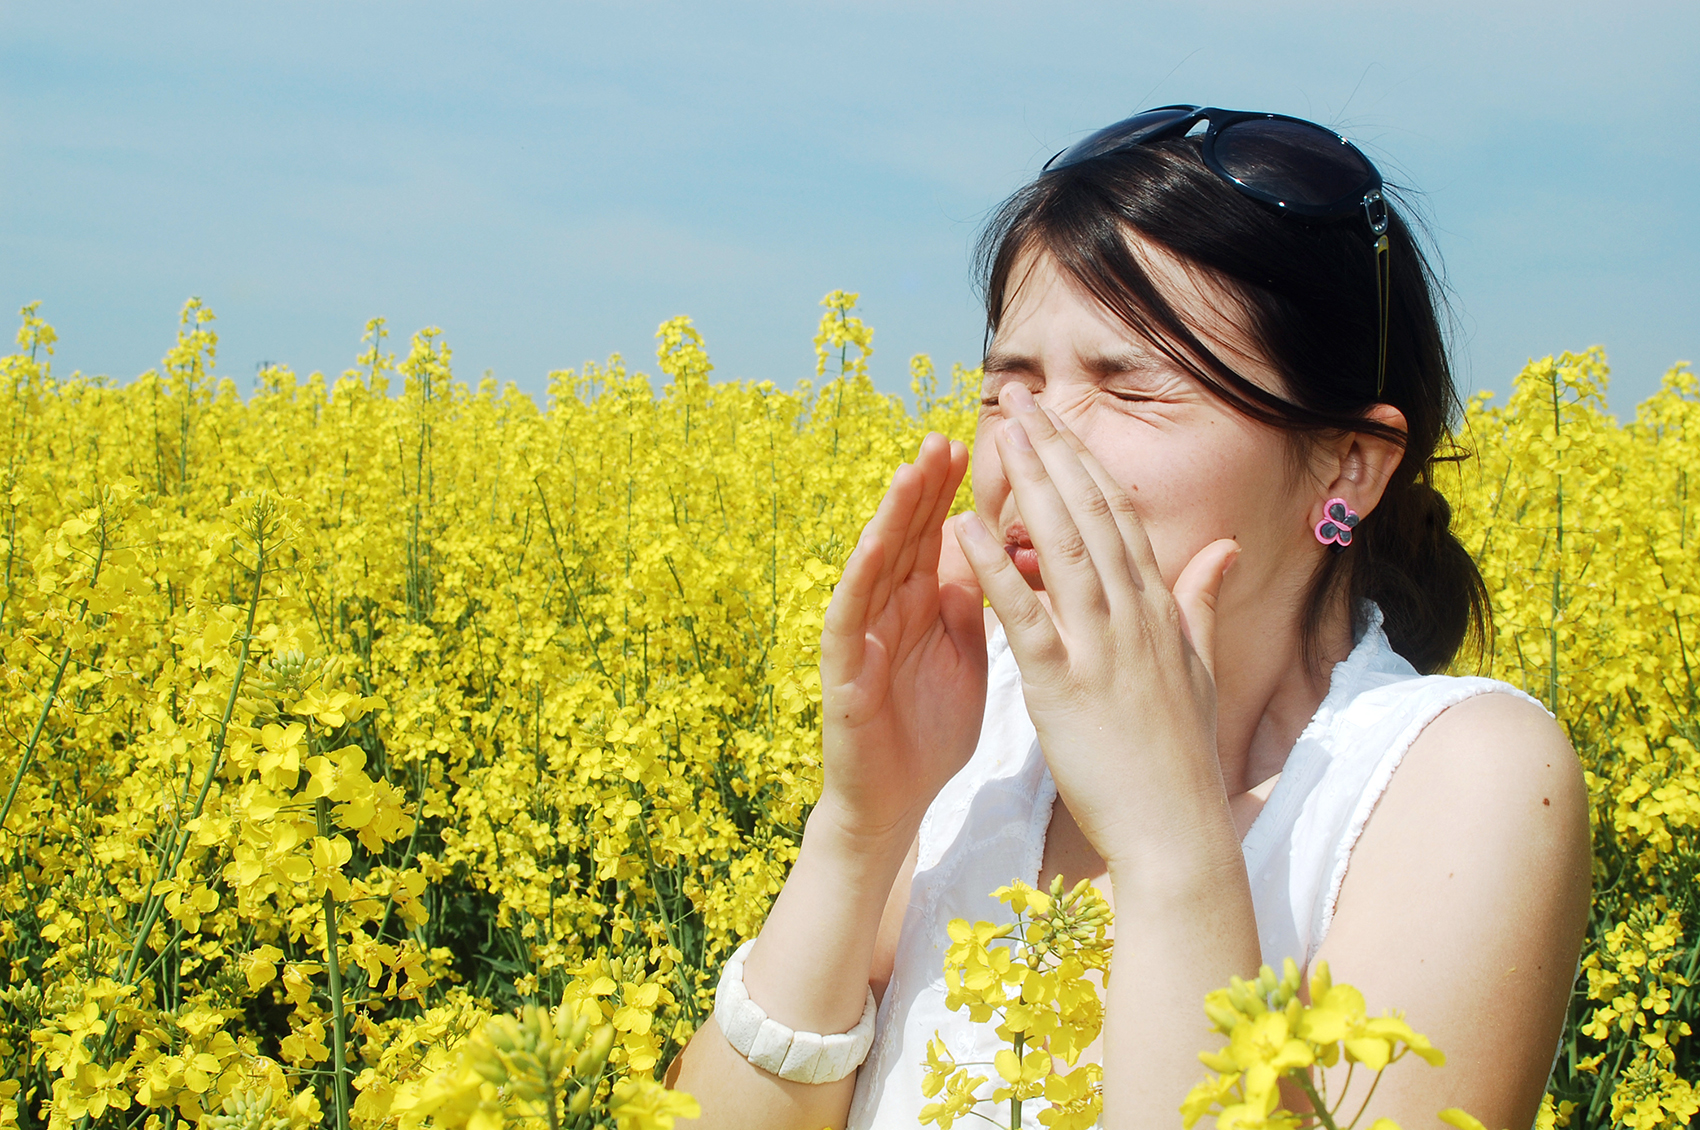 Immune system: if you know it, you manage allergies better